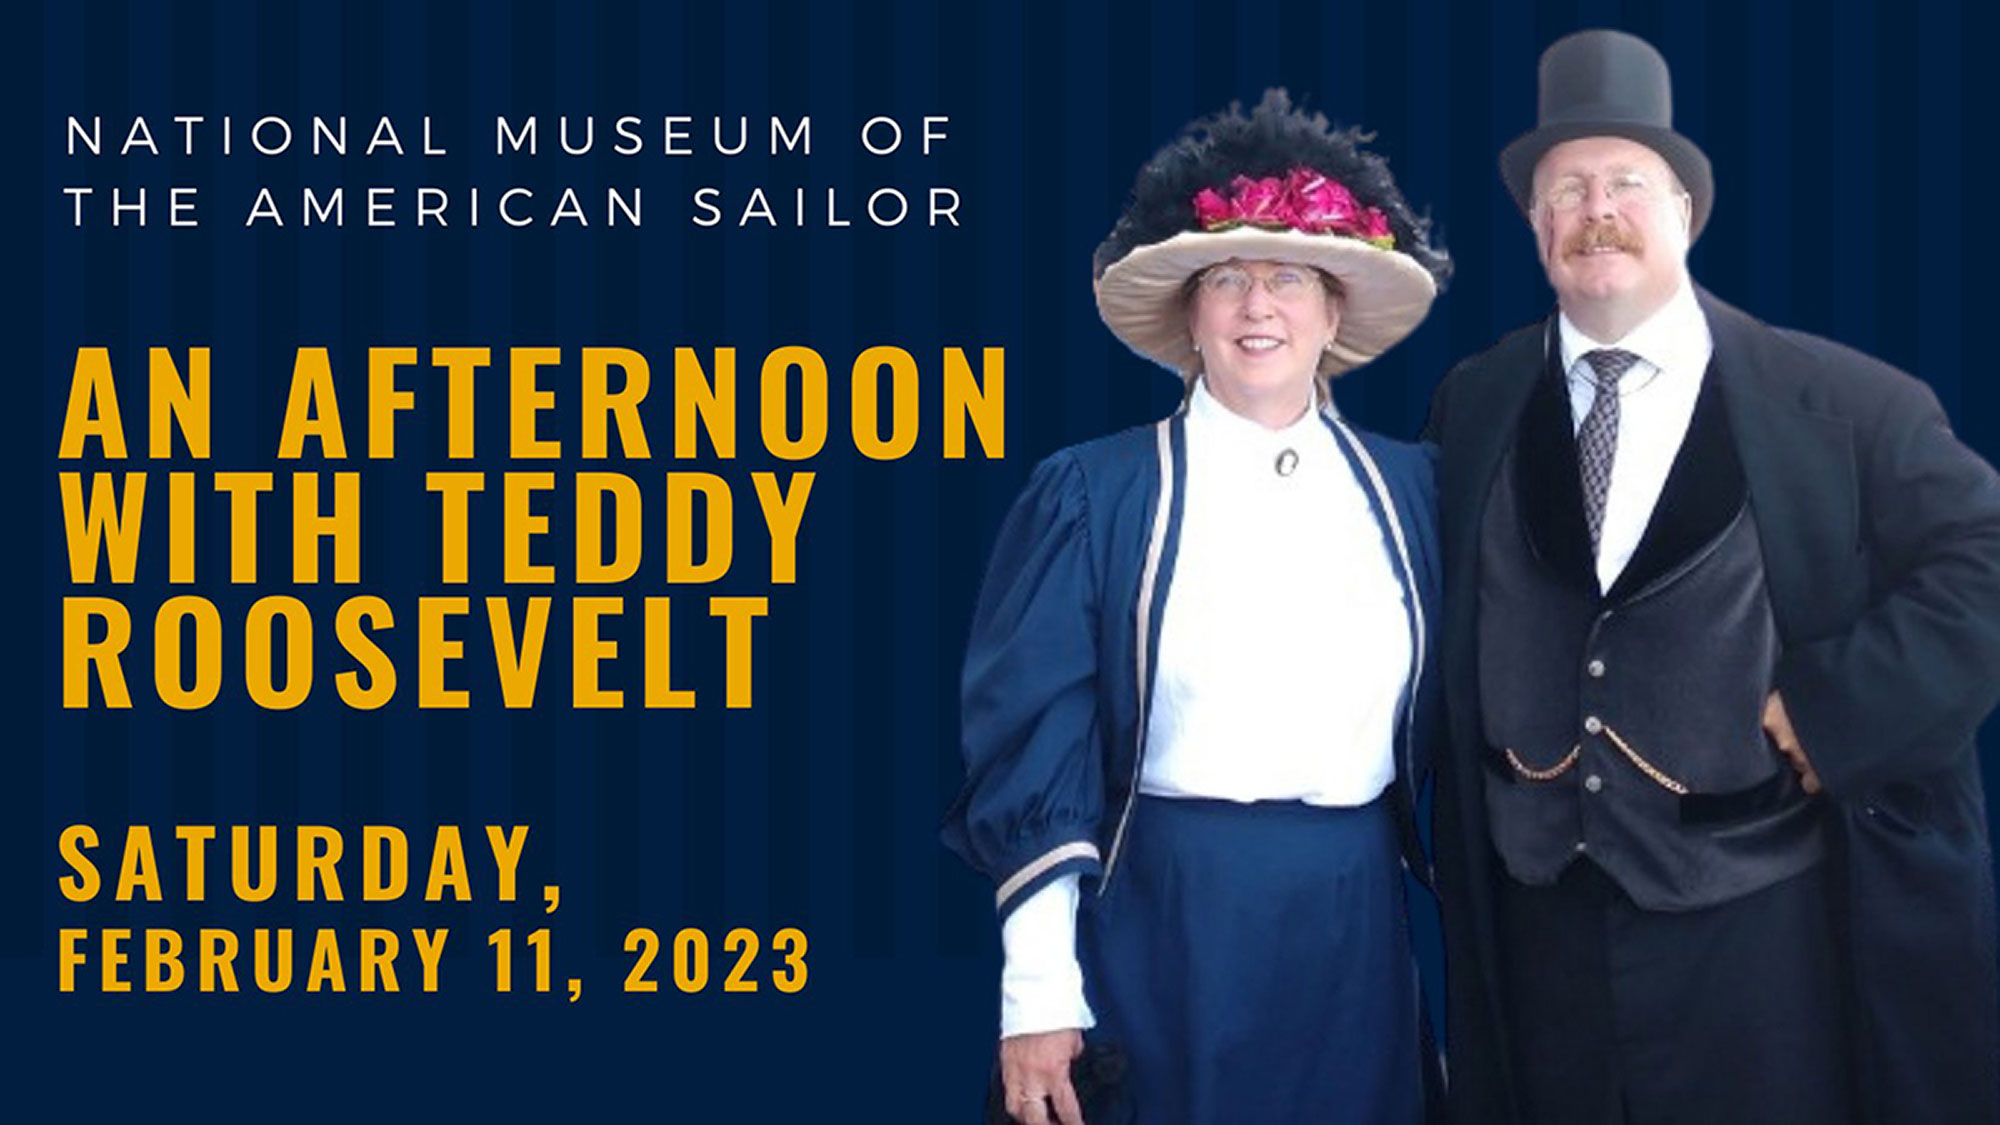 An Afternoon with Teddy Roosevelt at National Museum of The American Sailor